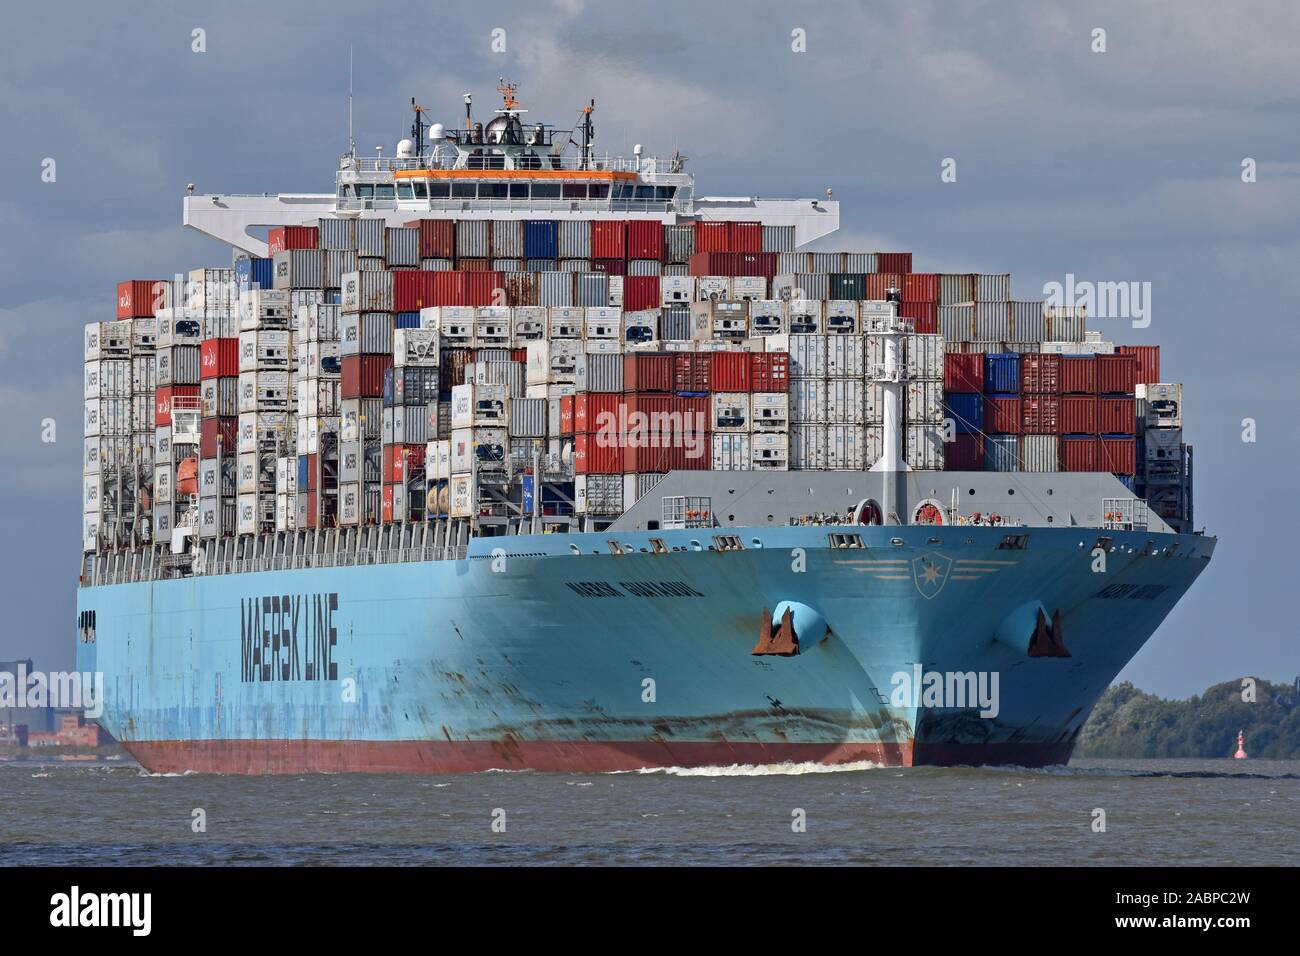 Maersk Guayaquil Stock Photo